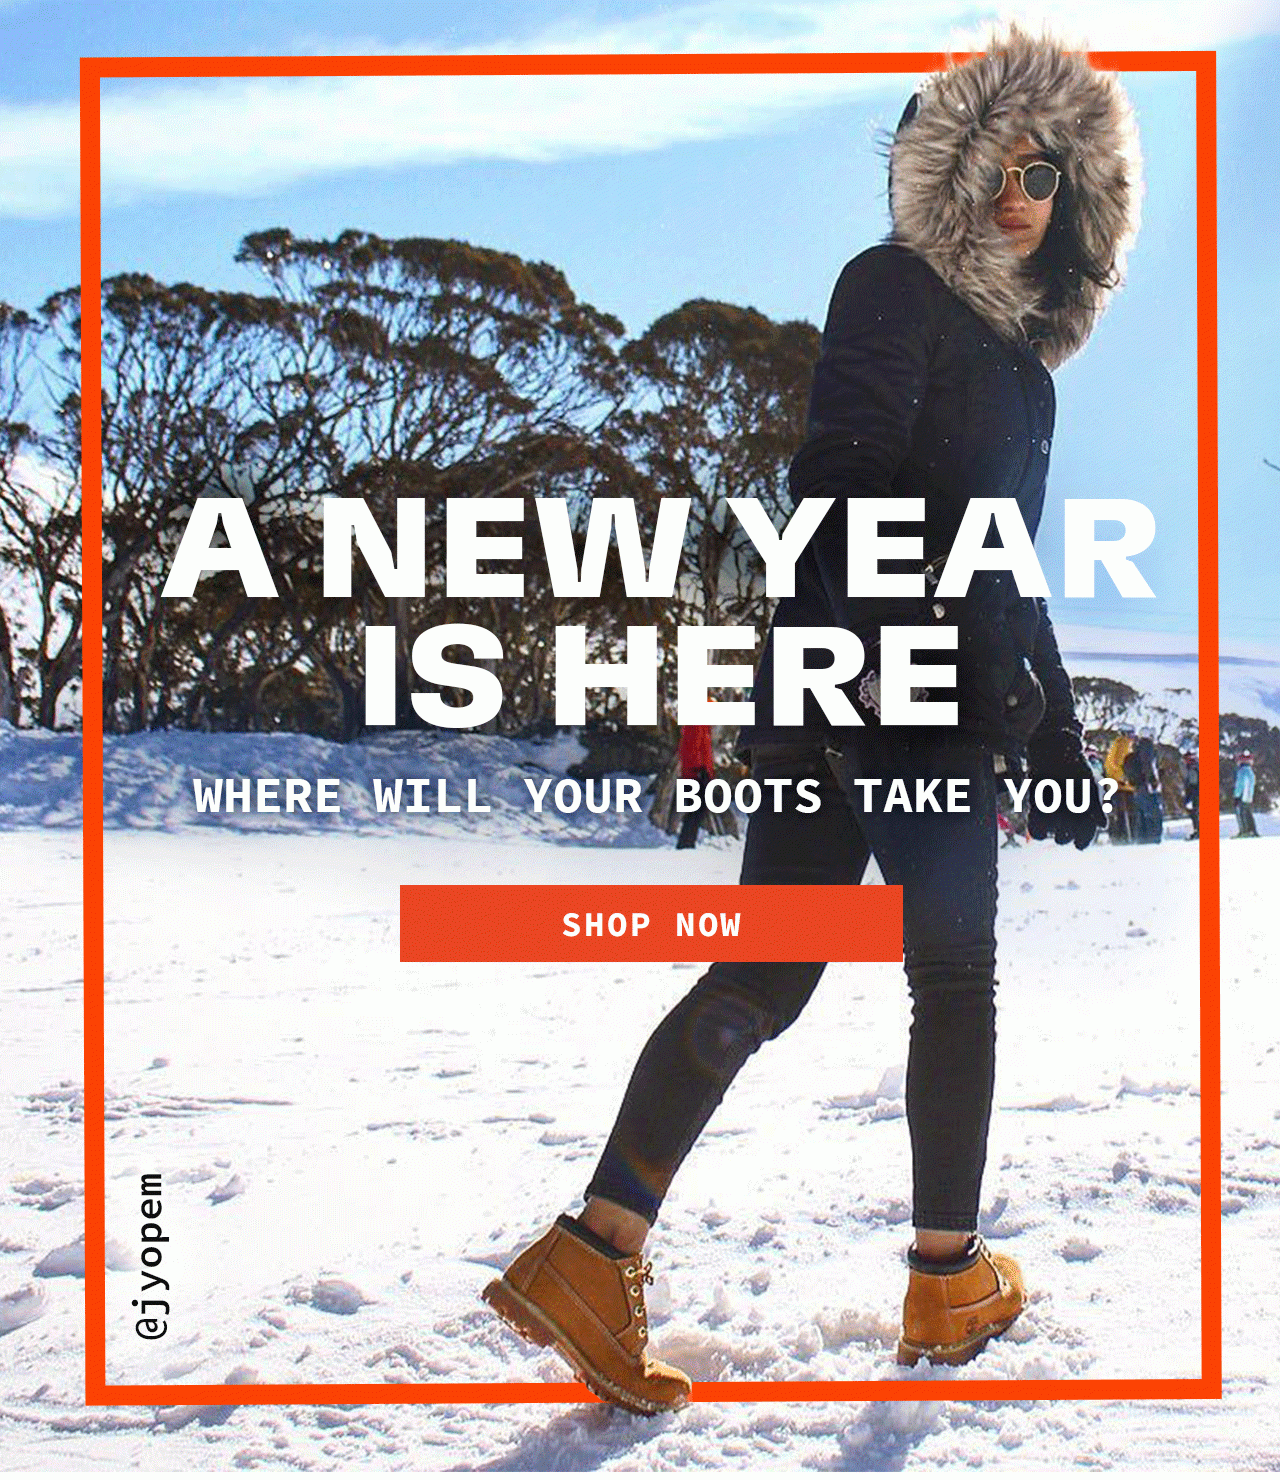 A NEW YEAR IS HERE. SHOP NOW.